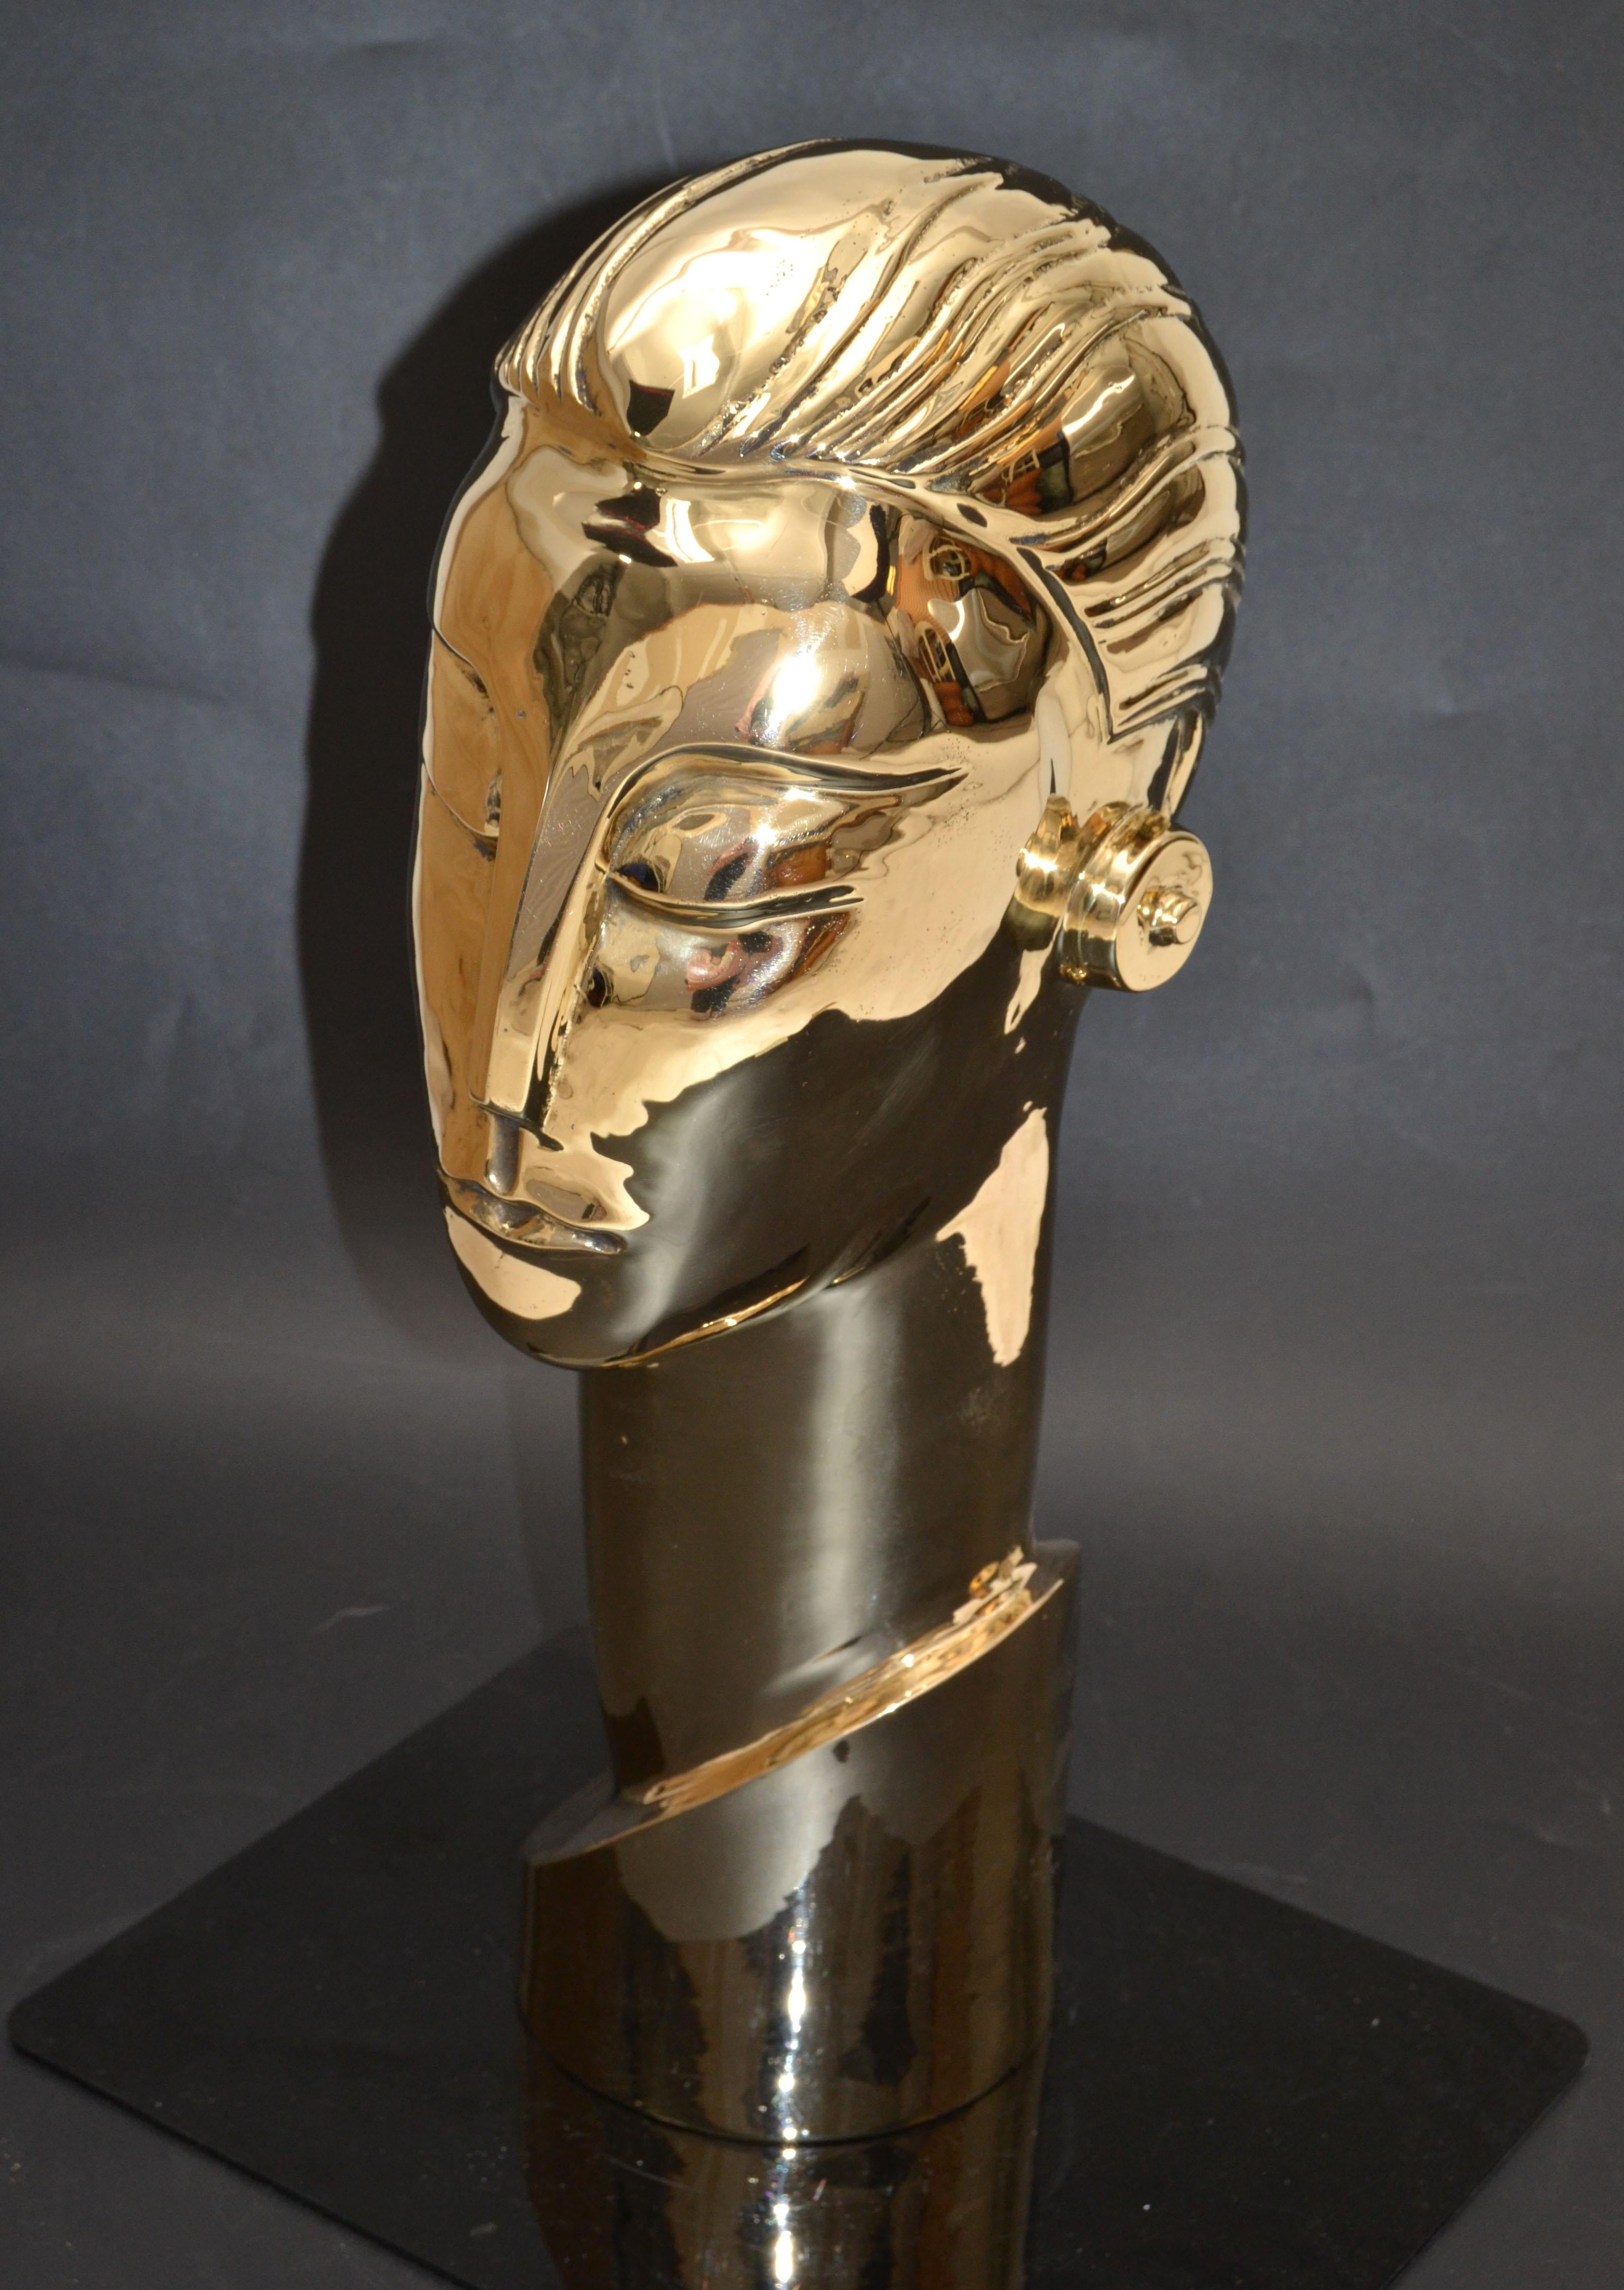 Art Deco Style Hagenauer Manner Bronze Bust, Figurative Sculpture Elongated Neck In Good Condition For Sale In Miami, FL